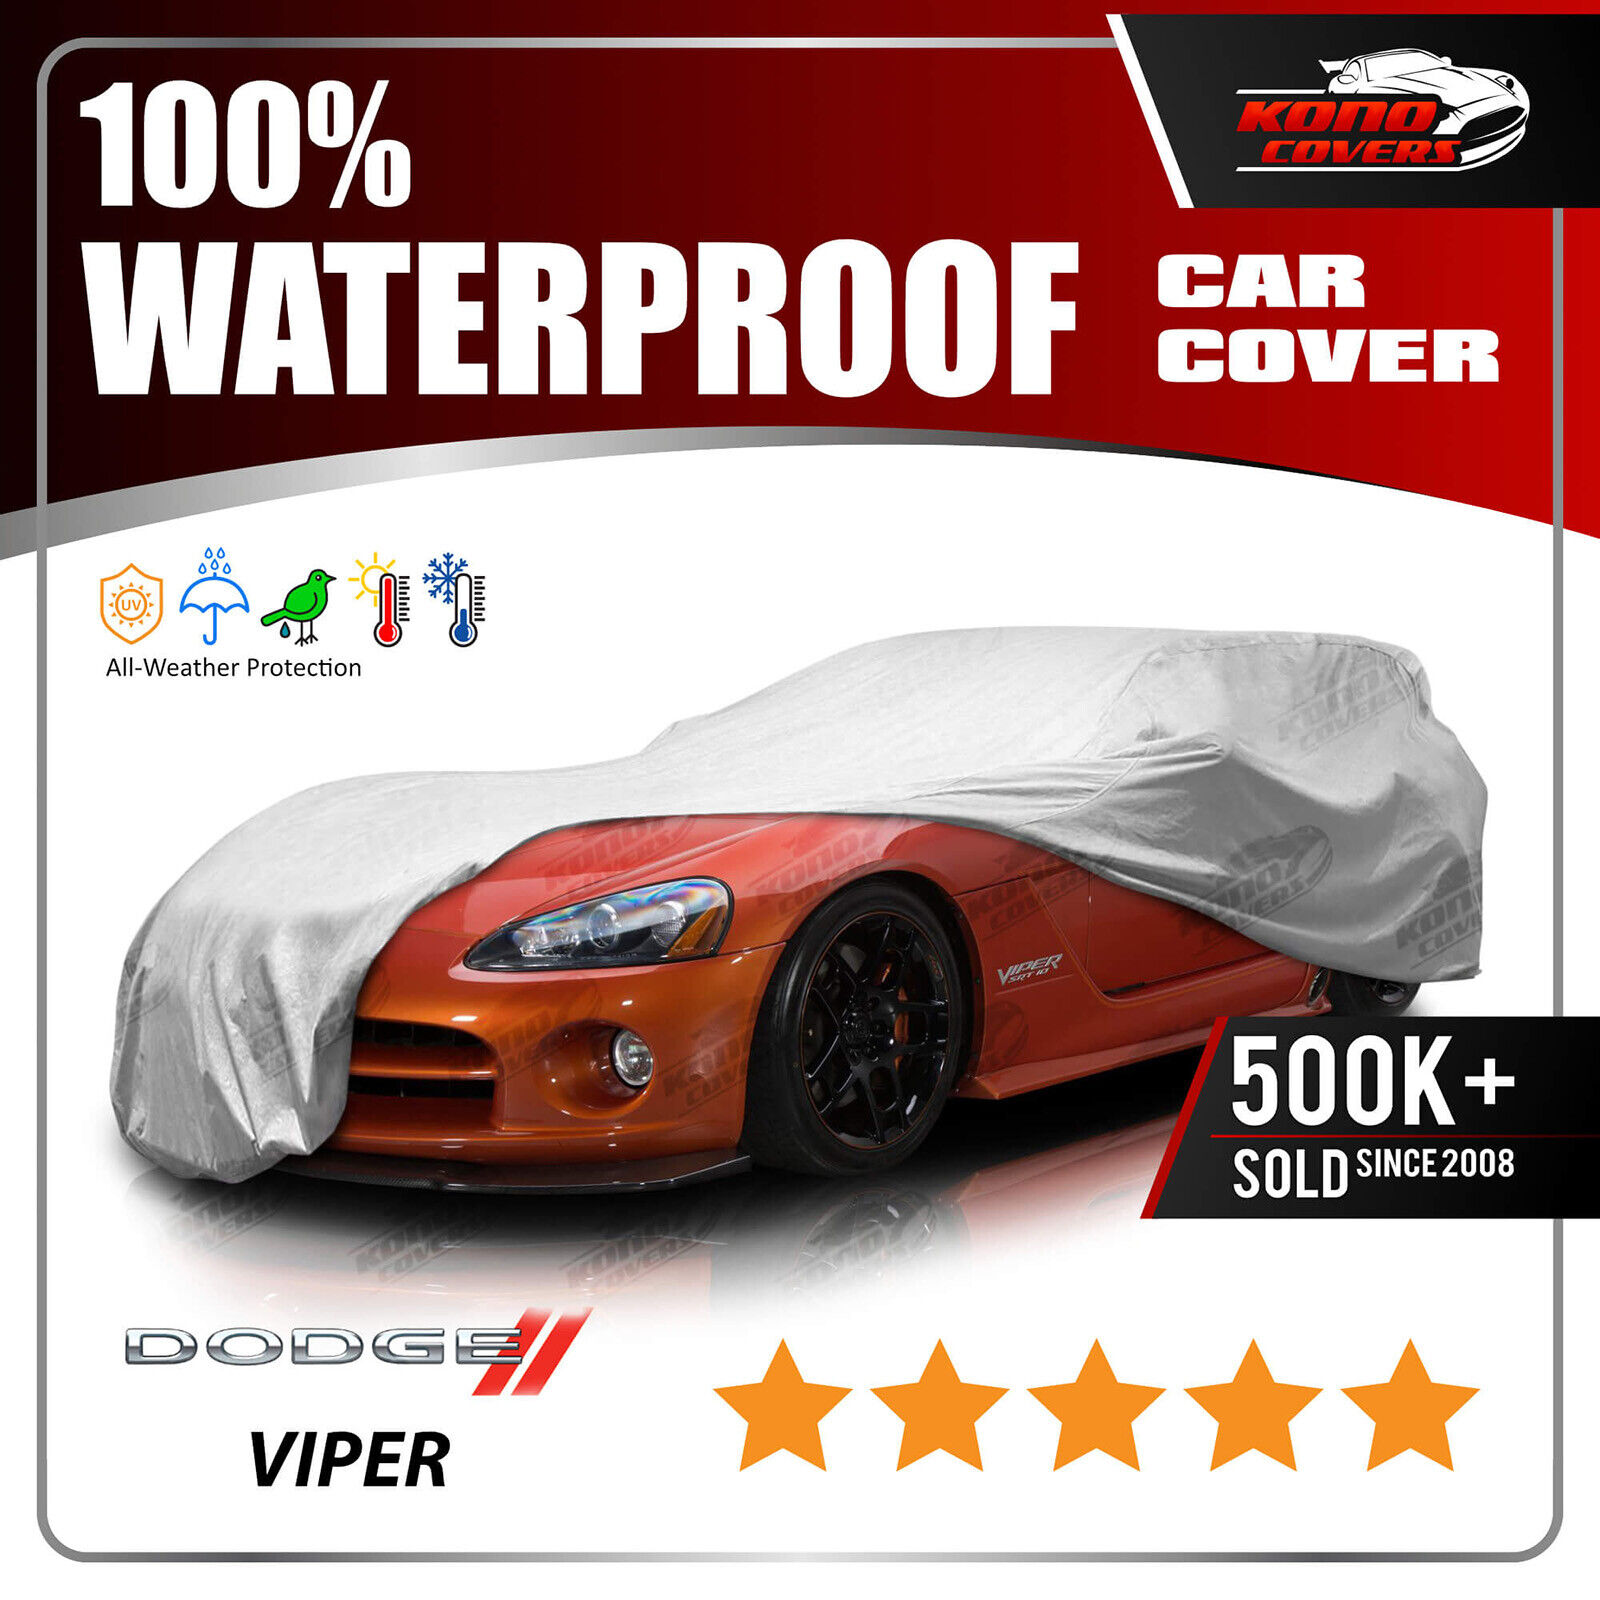 DODGE VIPER 2003-2006 CAR COVER - 100% Waterproof 100% Breathable